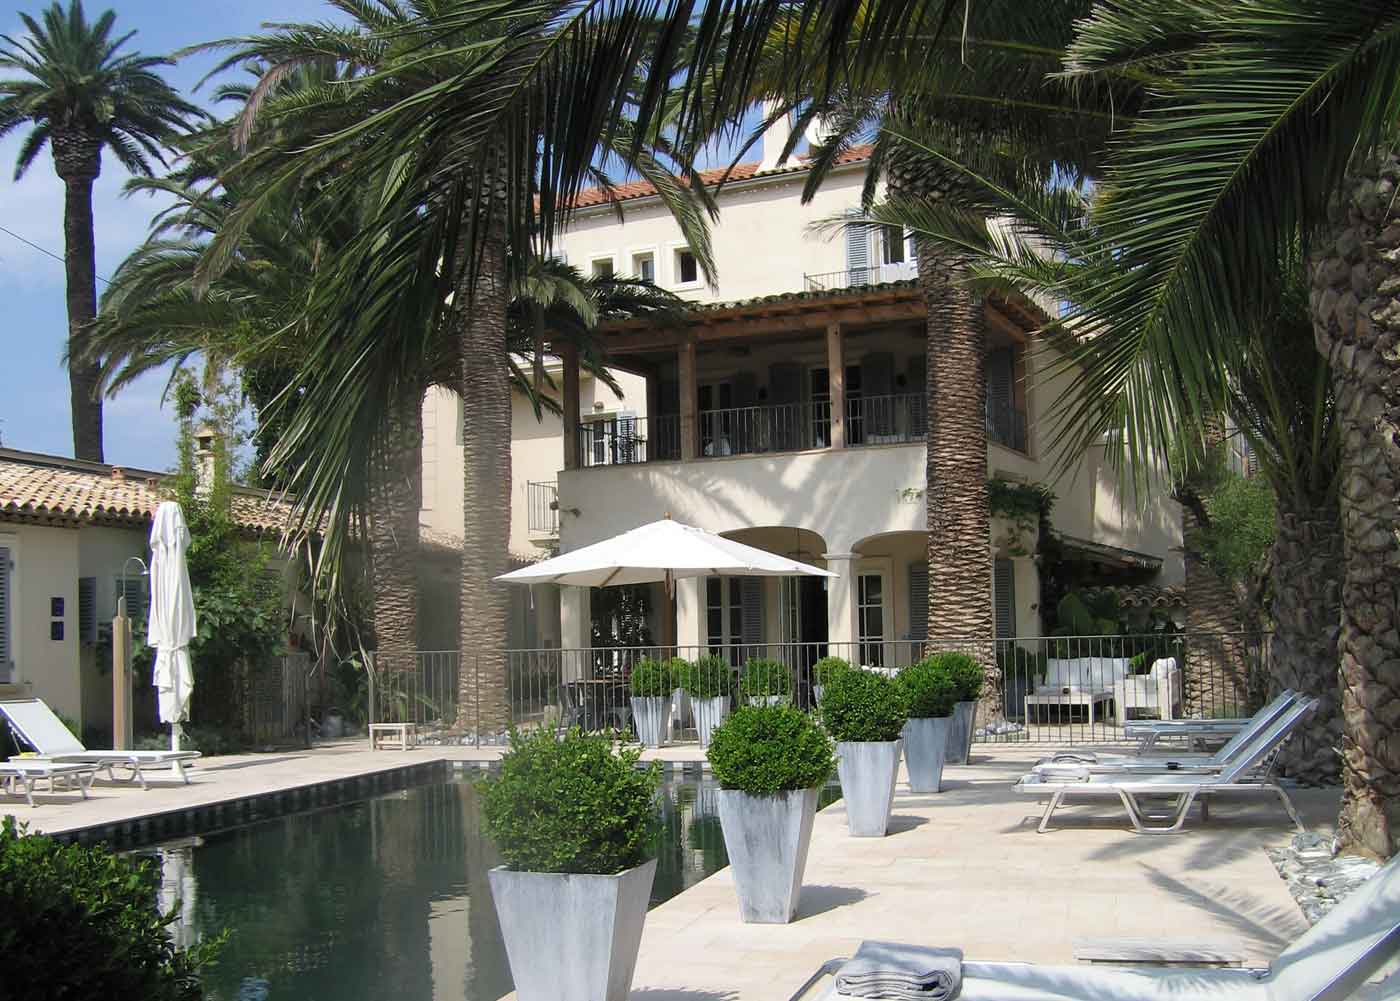 Pastis hotel, saint tropez, boutique hotel, côte d'azur, from the poolside blog, stylish family holidays